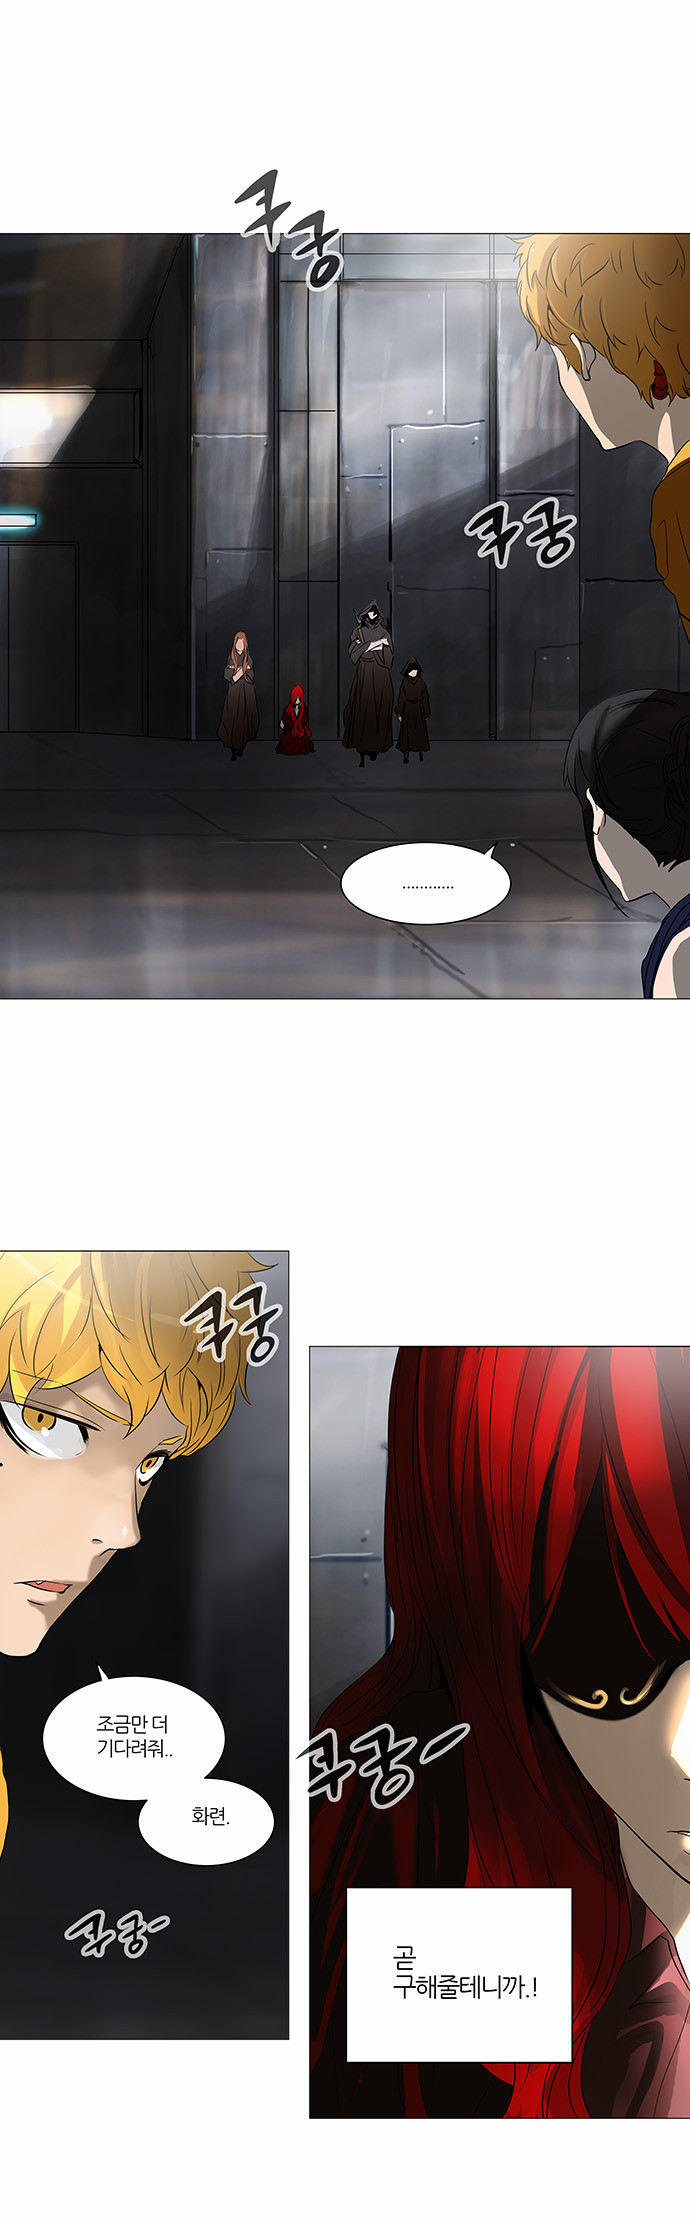 Tower of God - Chapter 238 - Page 1